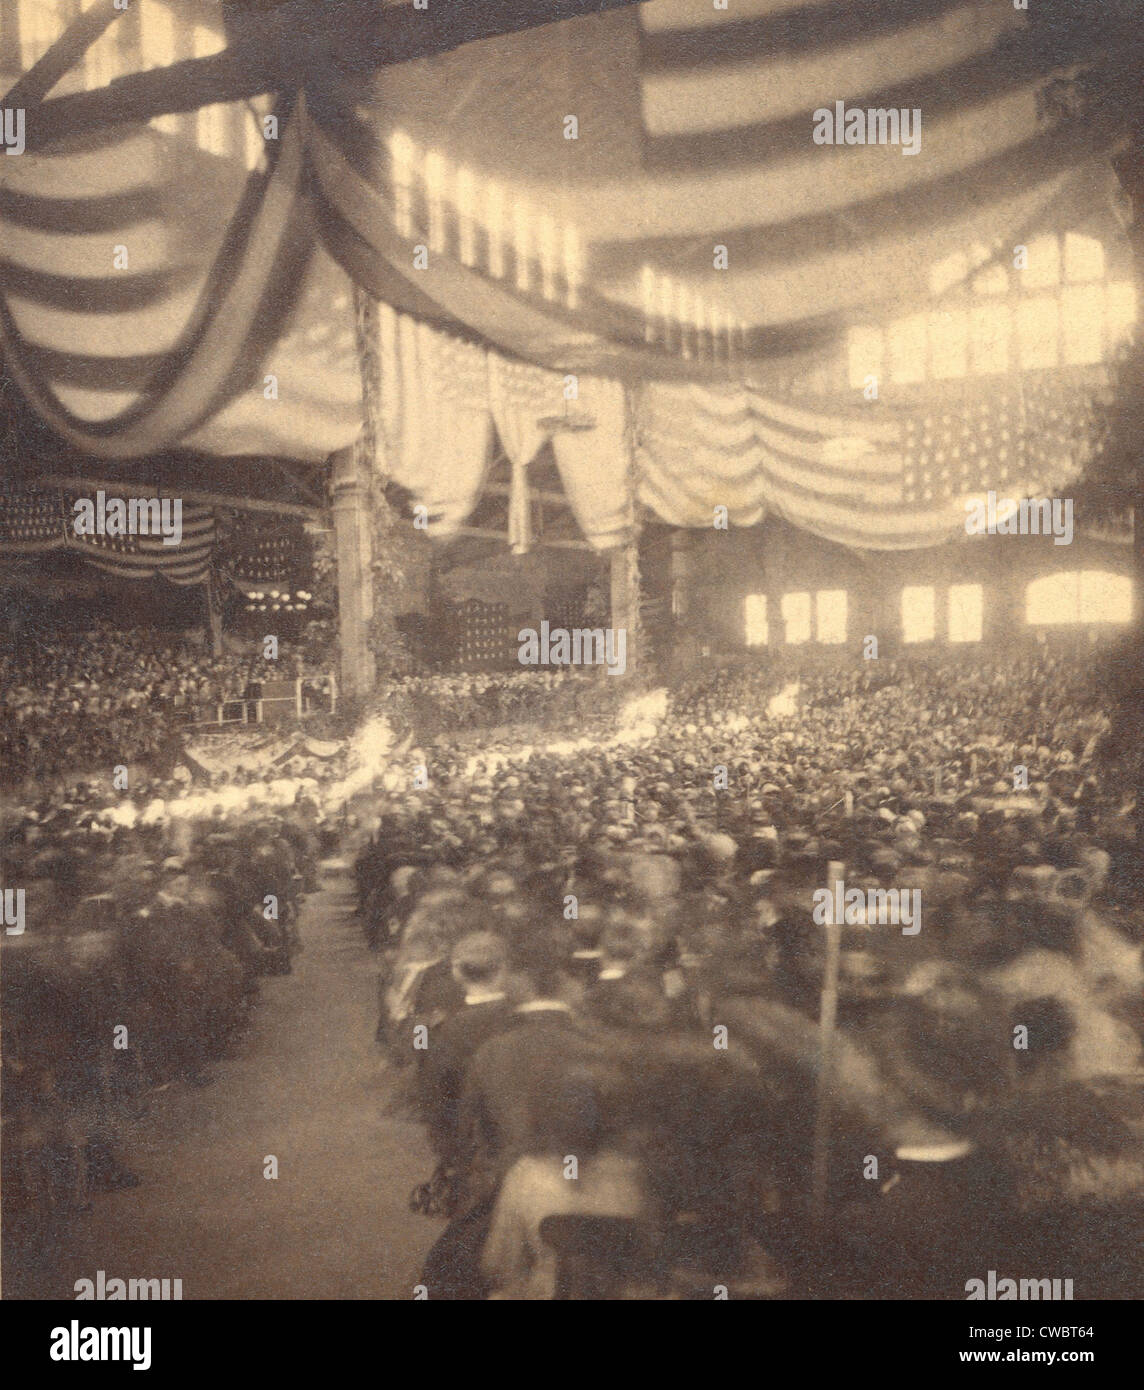 Interior view of a large convention hall filled with seated people. The 35-star flags decorating the hall allow the image to be Stock Photo